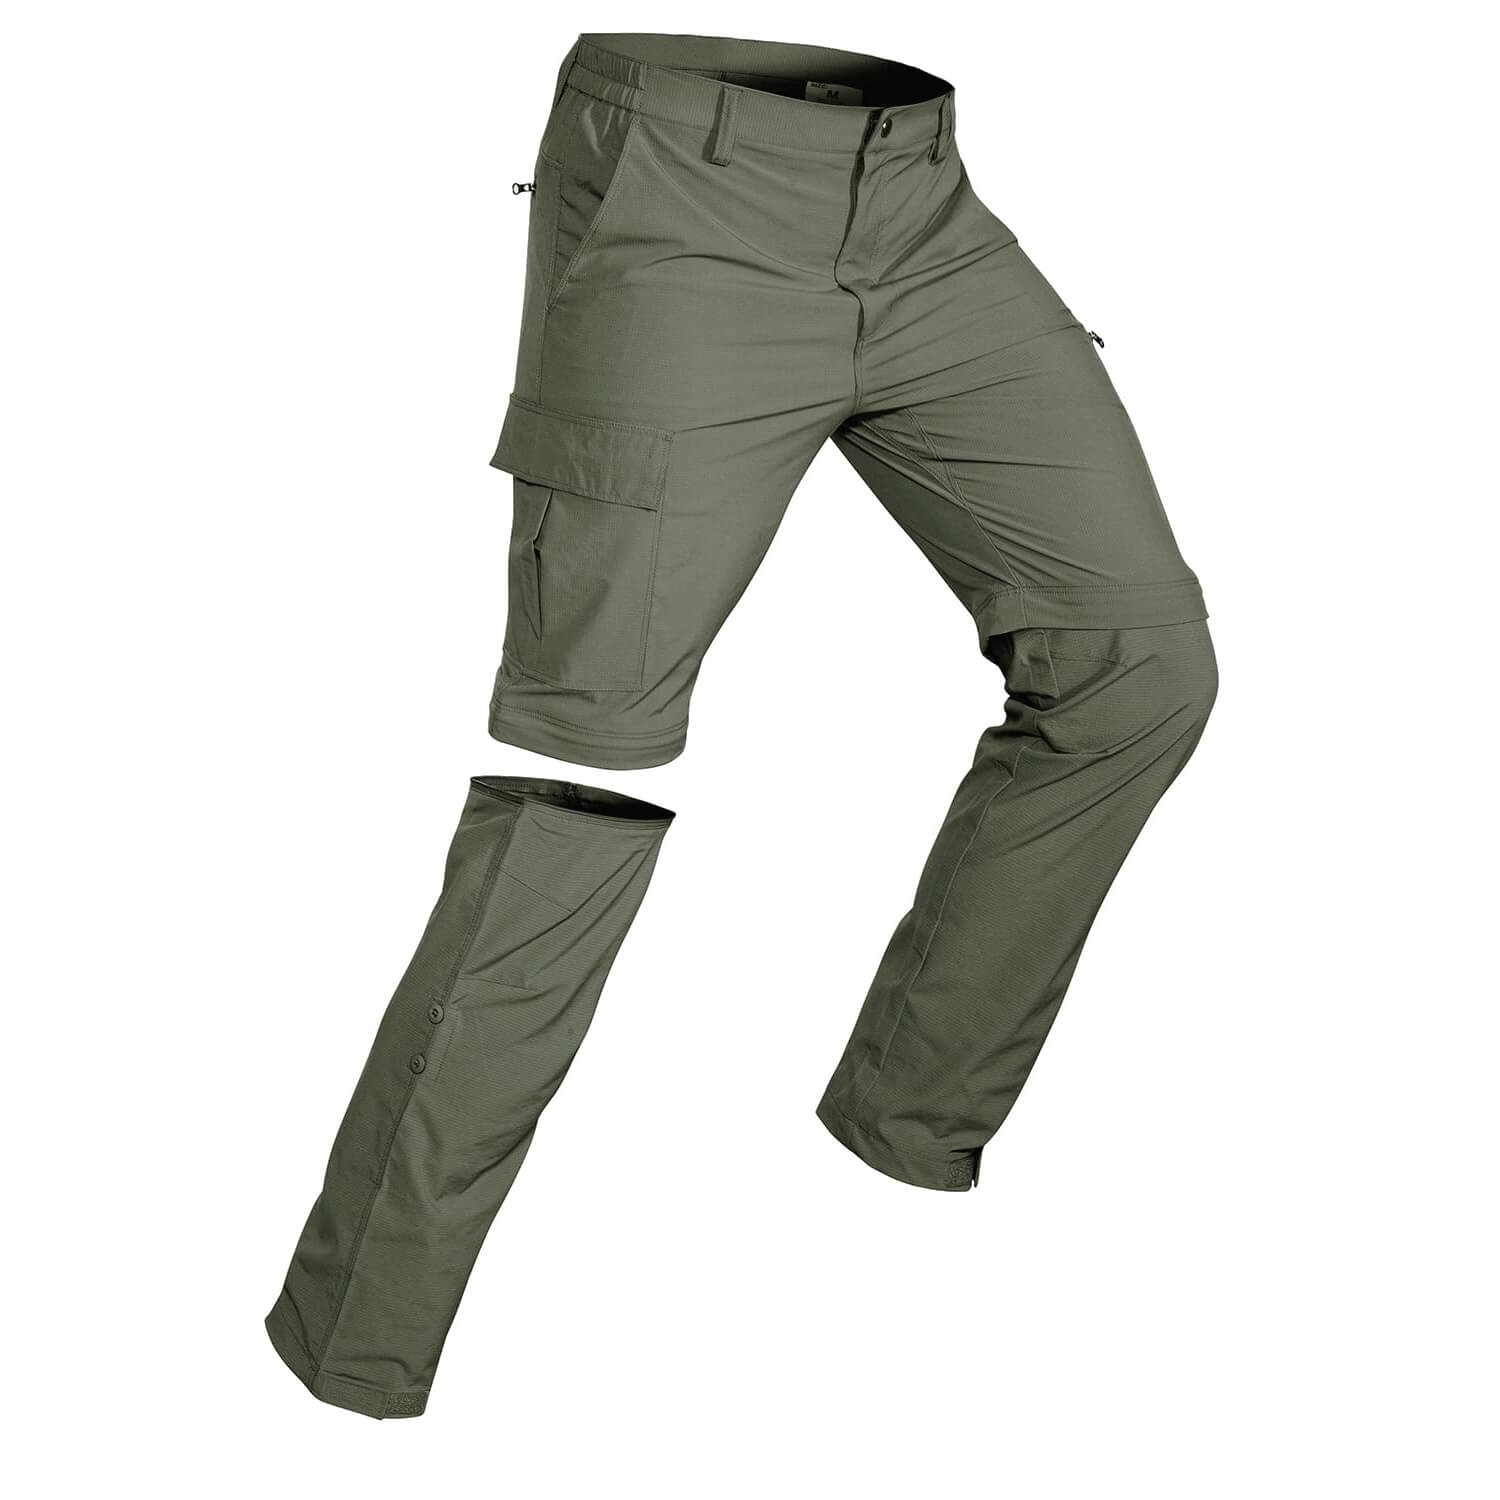 YYDGH On Clearance Men's Outdoor Hiking Pants Convertible Zip Off Quick Dry  Fishing Pants Lightweight Straight Work Pants Trousers(Khaki,XL)